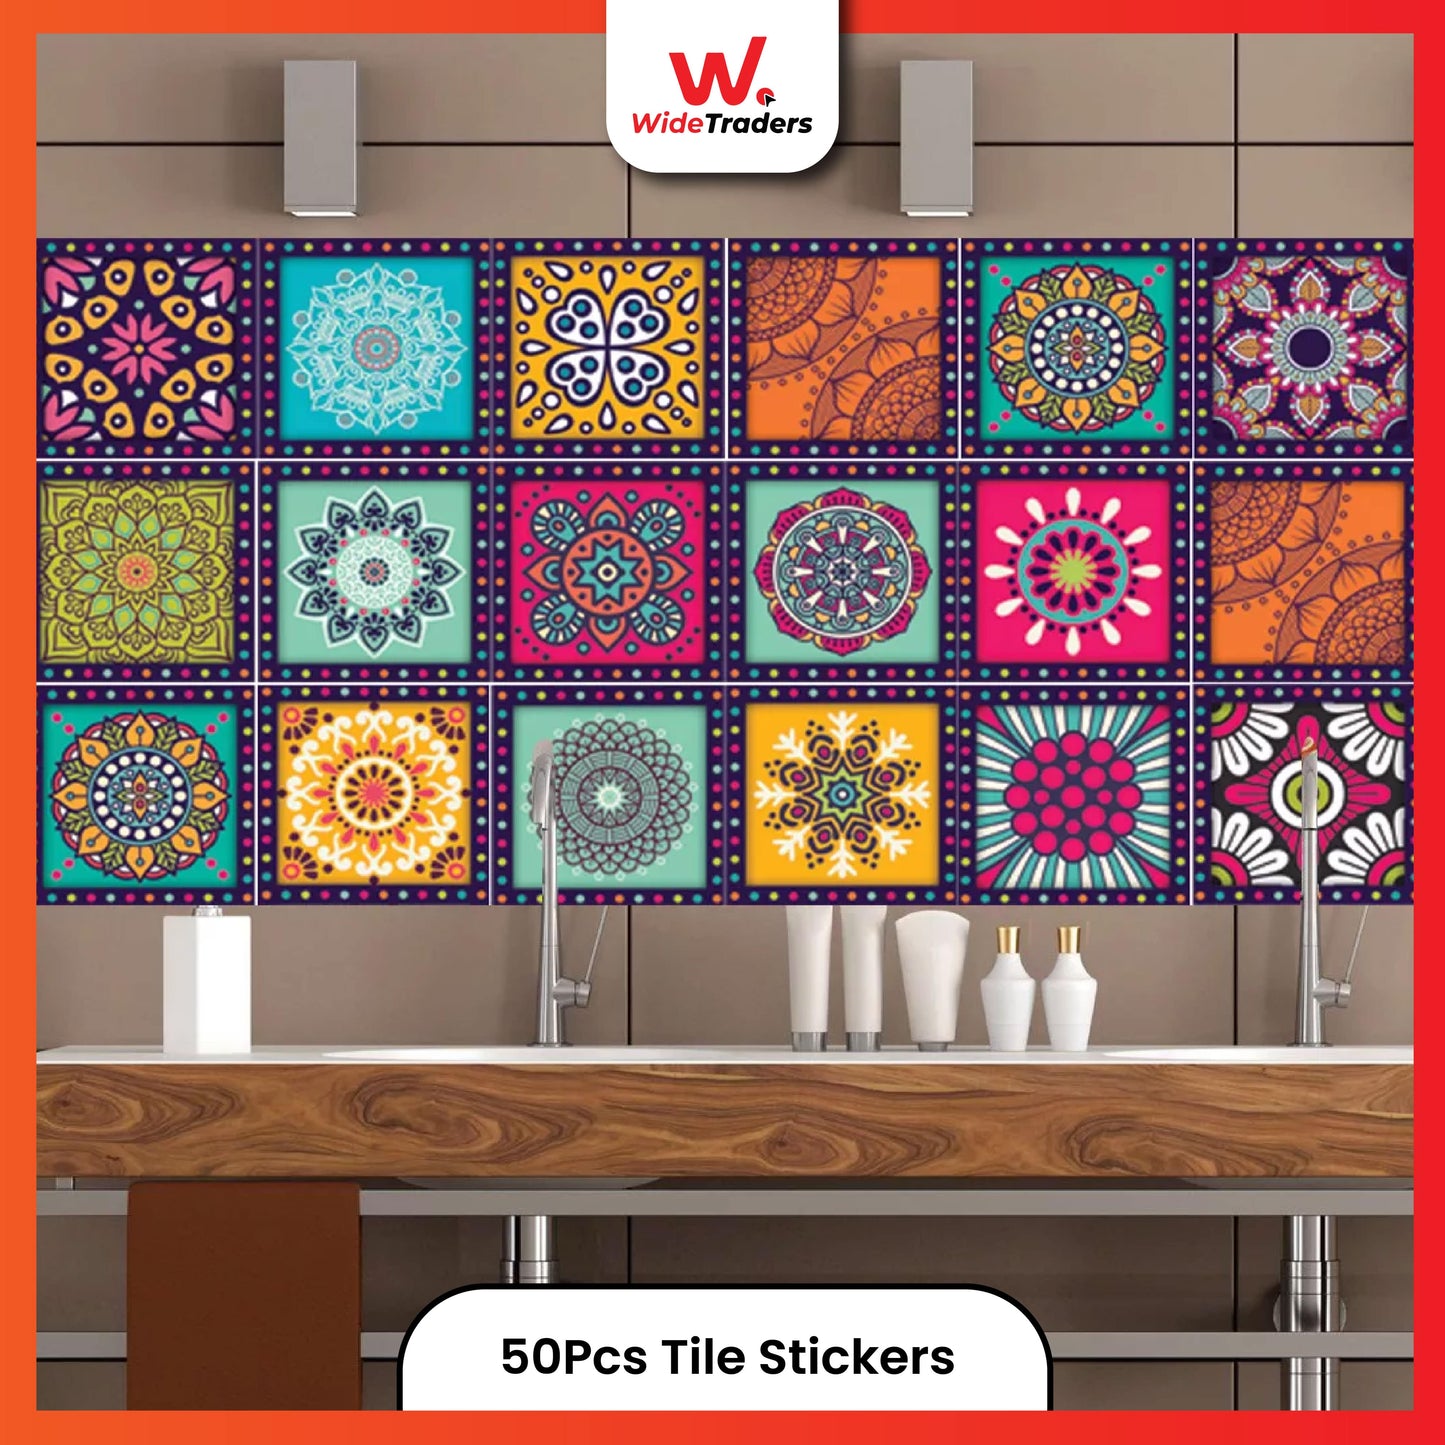 50Pcs Walls Self Adhesive Tile Sticker For Home Decor -wide traders –  Online Shopping in Pakistan